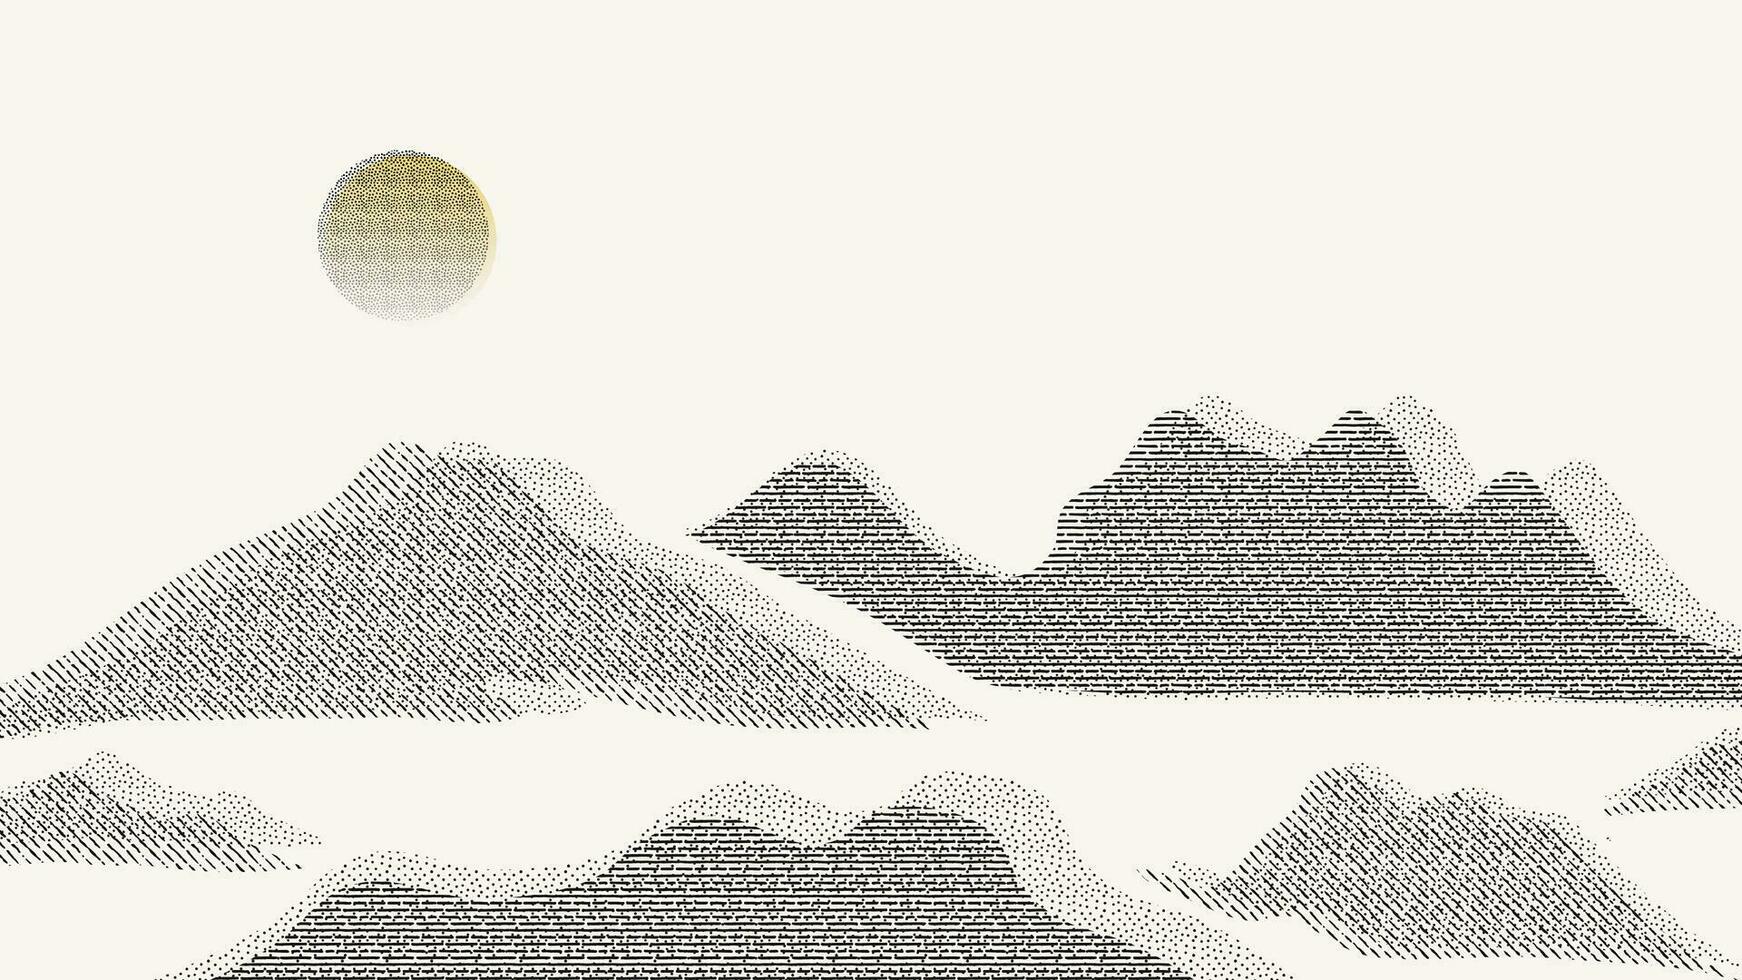 Abstract mountain background vector. Mountain landscape with fading dot effect, moon, halftone, dot grunge texture. Monochrome hills art wallpaper design for print, wall art, cover and interior. vector